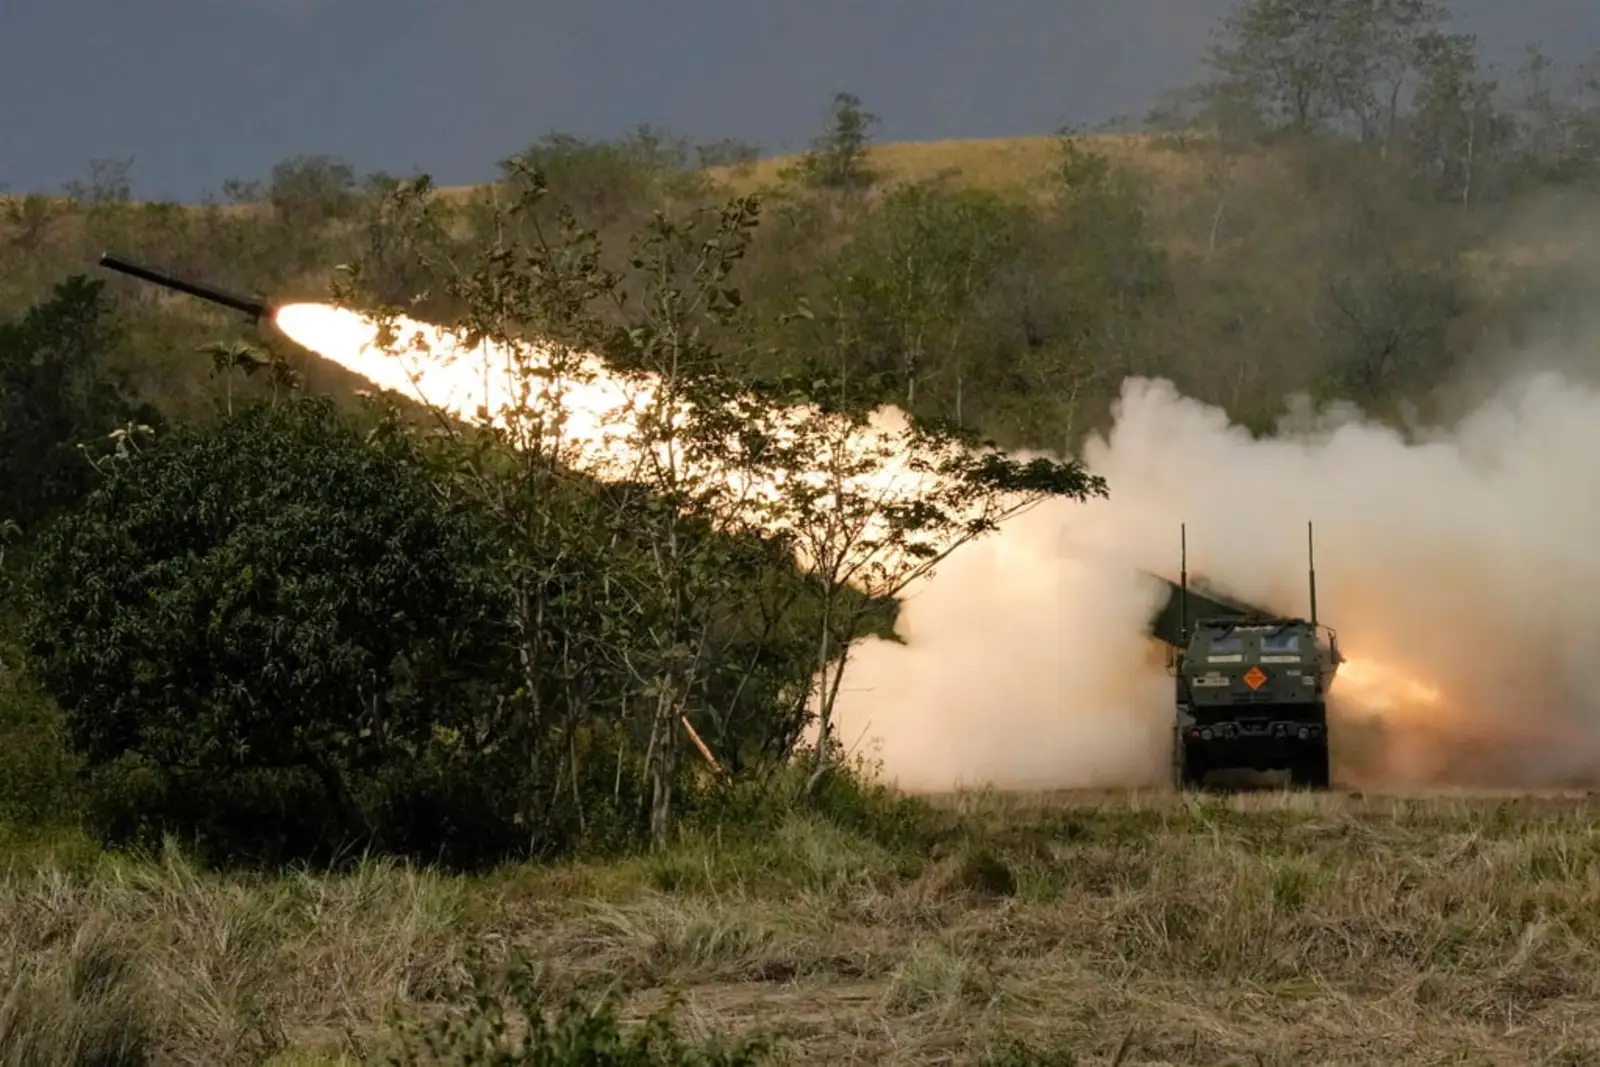 Philippines says US mid-range missile system to be pulled out